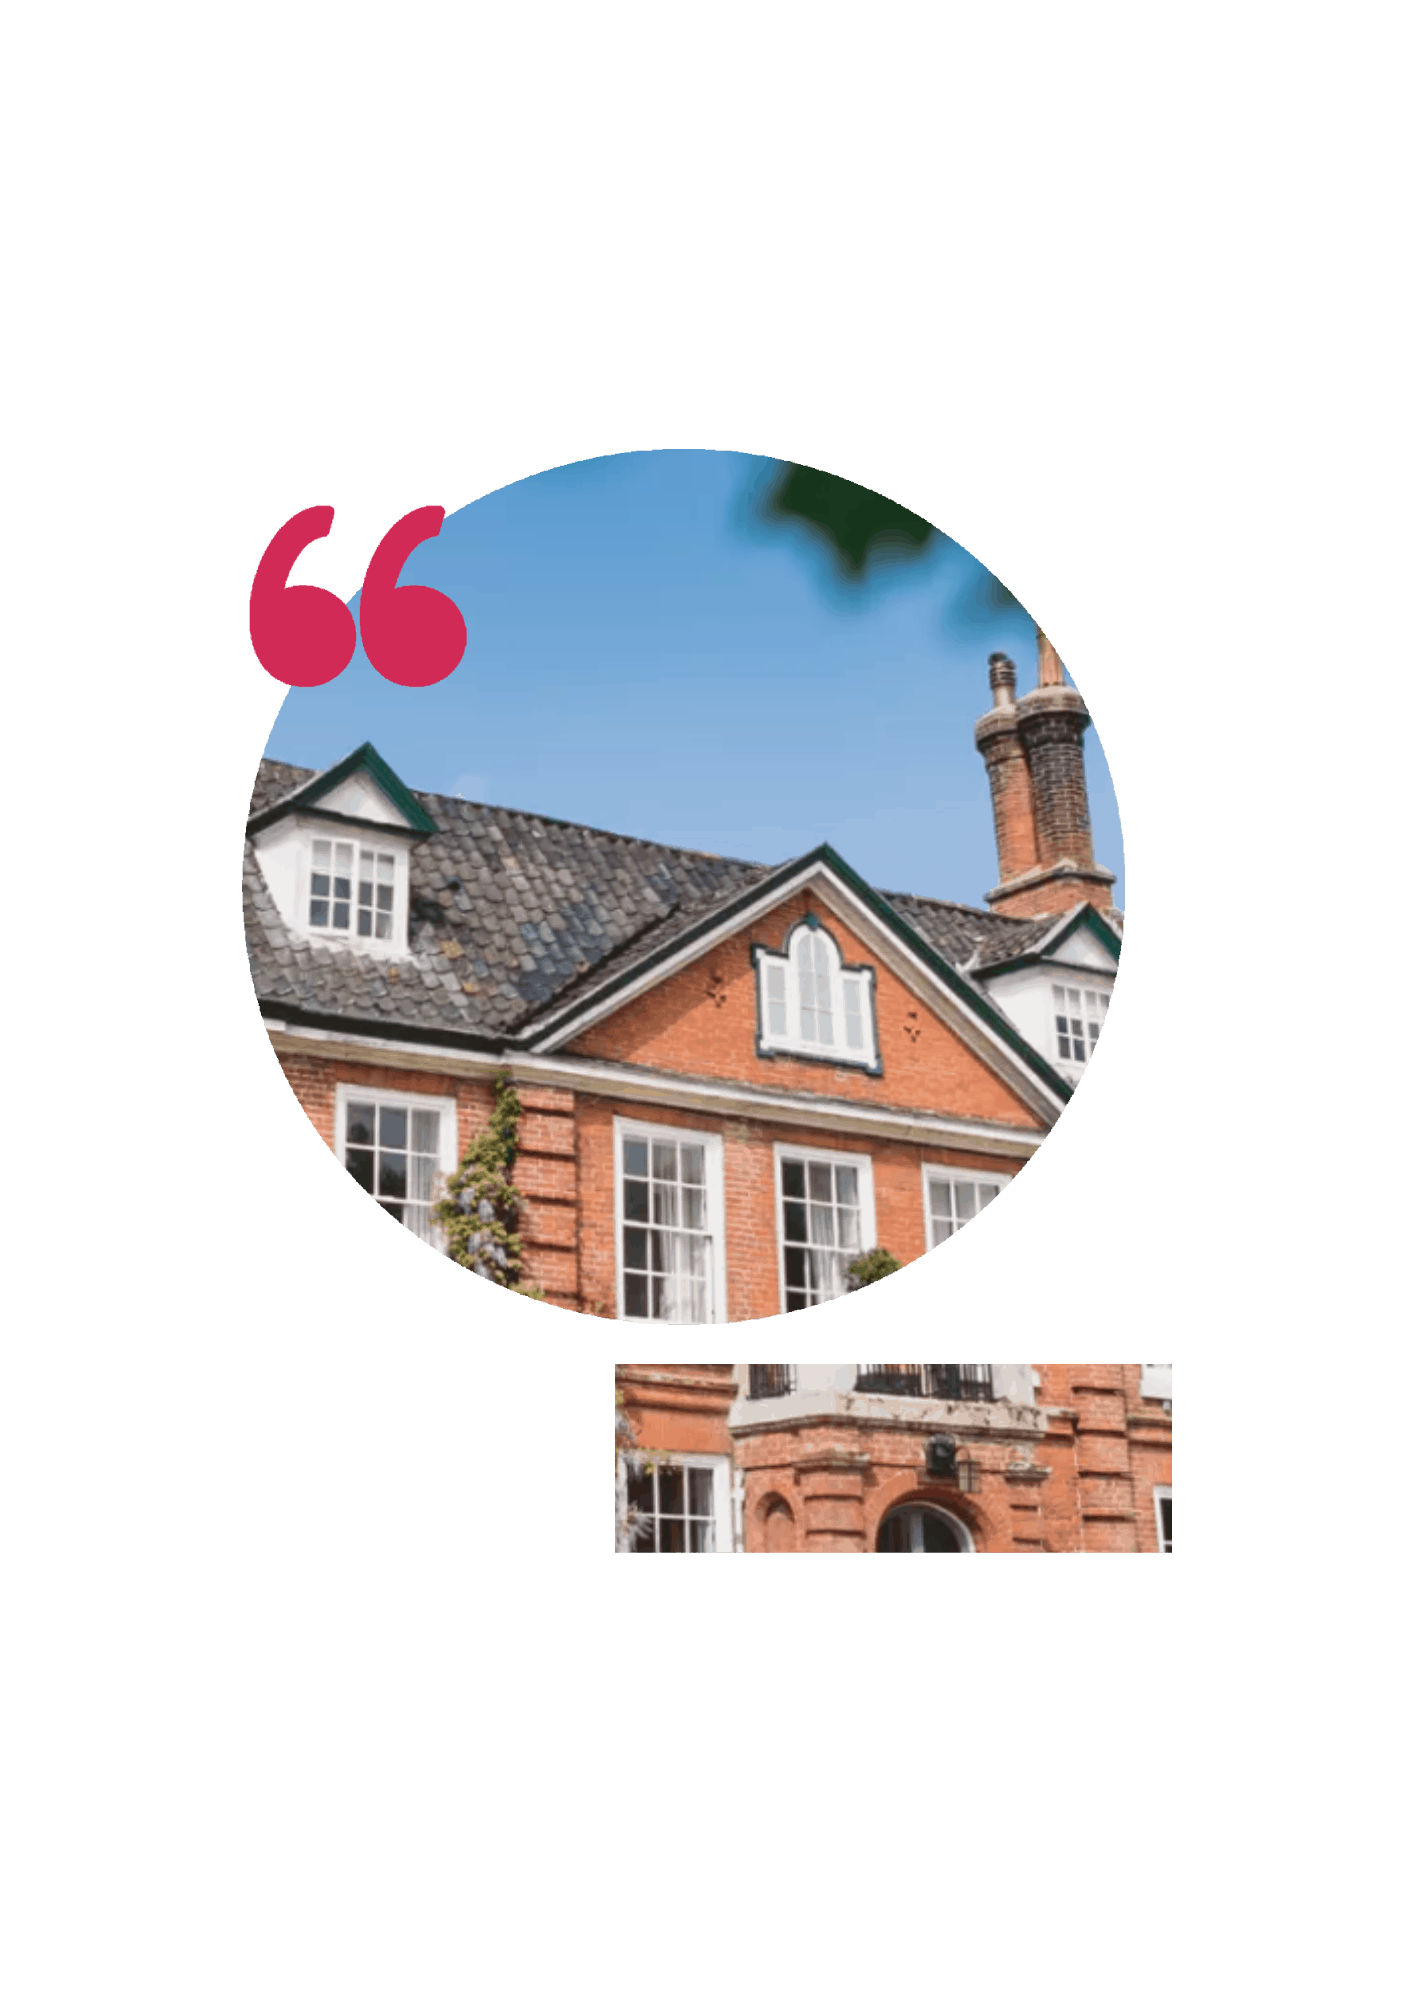 We are constantly delighted with their level of client service and their knowledge. They always proactively respond to our requests in a professional, positive and effective way. 